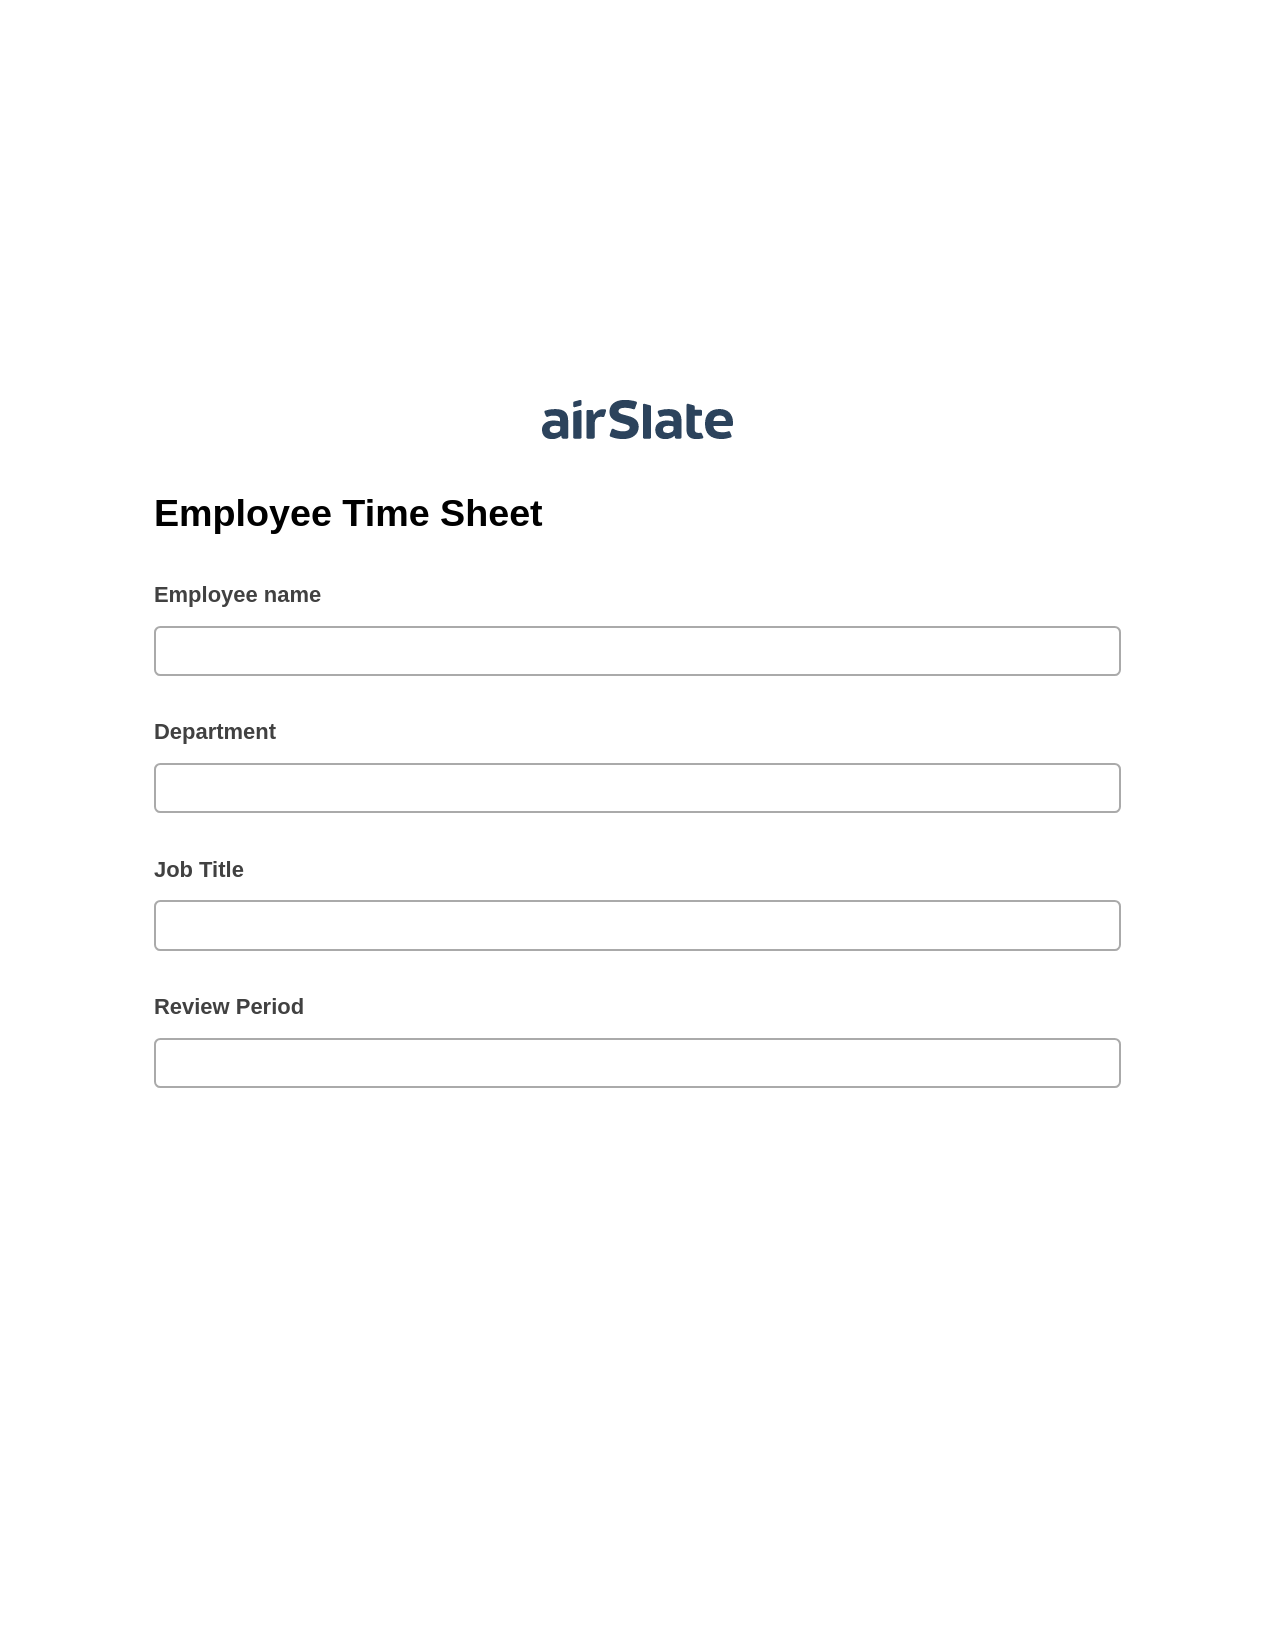 Employee Time Sheet Pre-fill from Salesforce Records with SOQL Bot, Assign Roles to Recipients Bot, Export to Excel 365 Bot